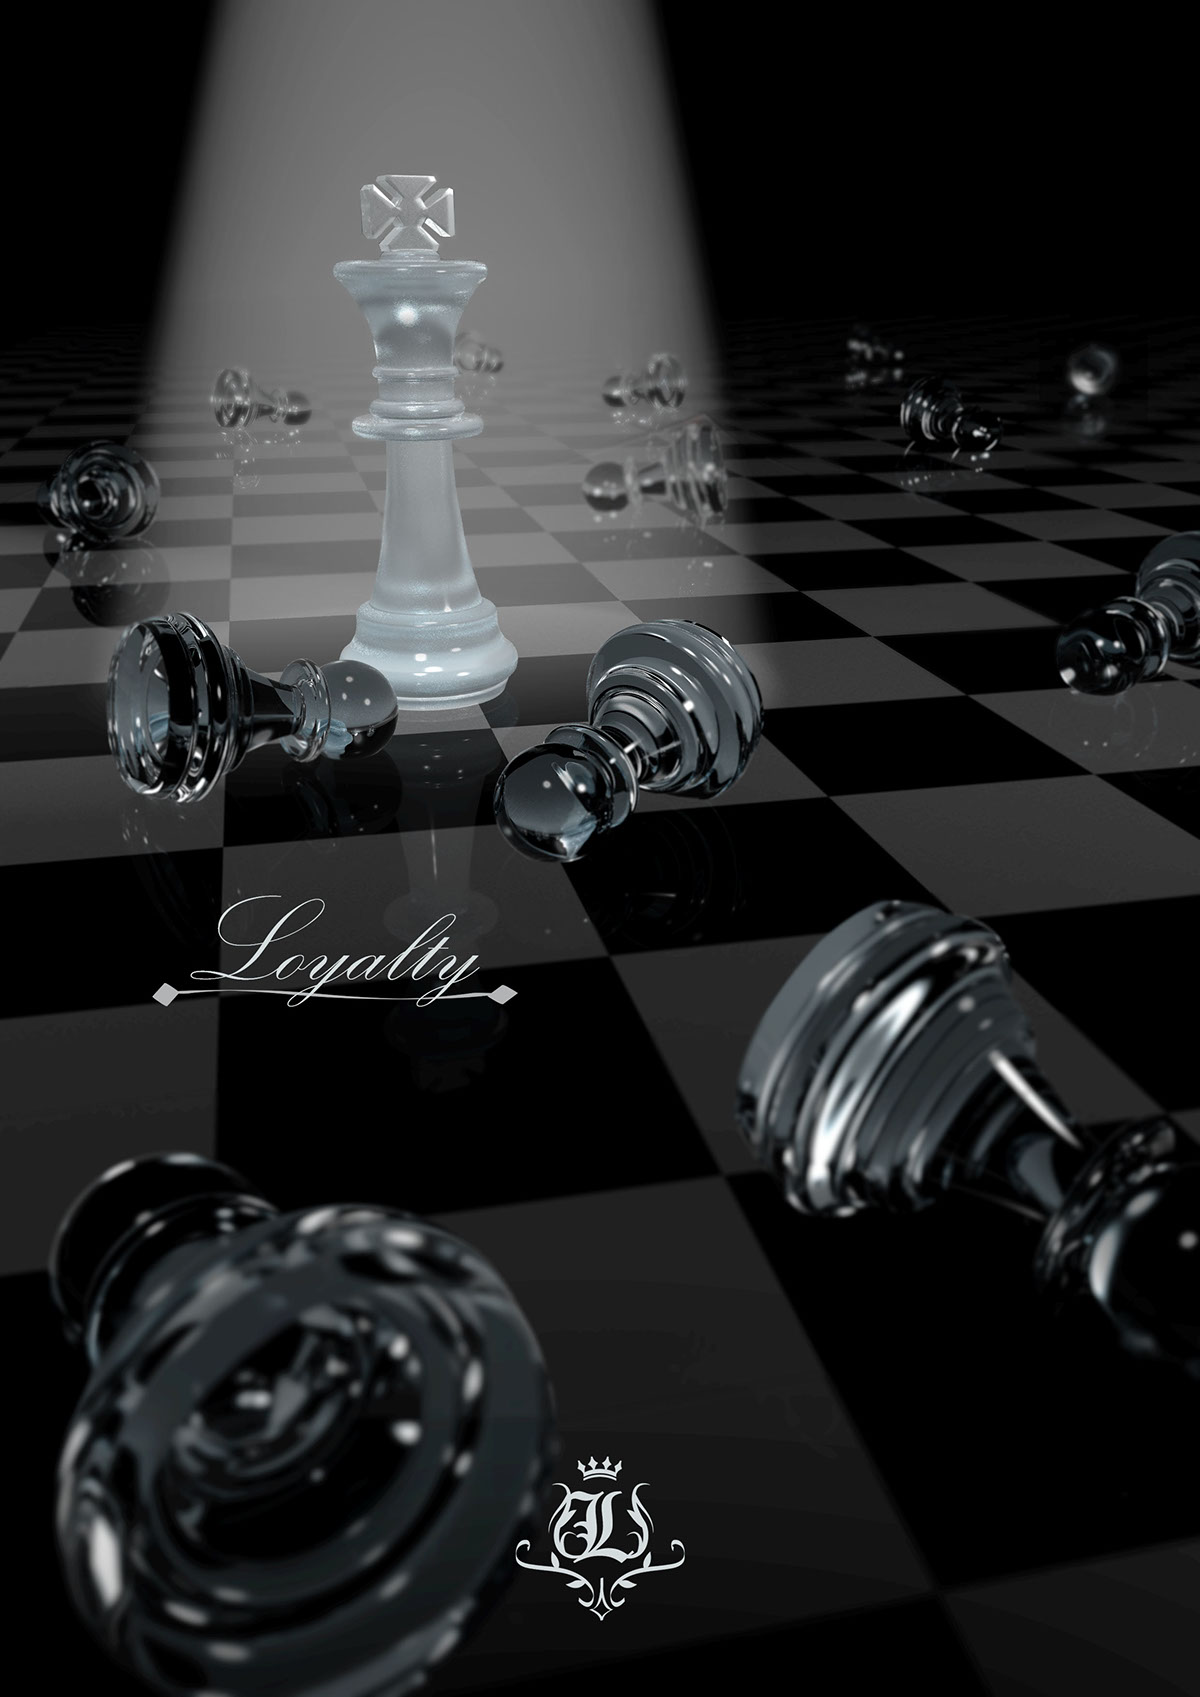 3D 3d modeling modeling Video turnaround autodesk 3ds max design posters concept creative thinking Concept Idea betray loyalty guardian 3D chess chess